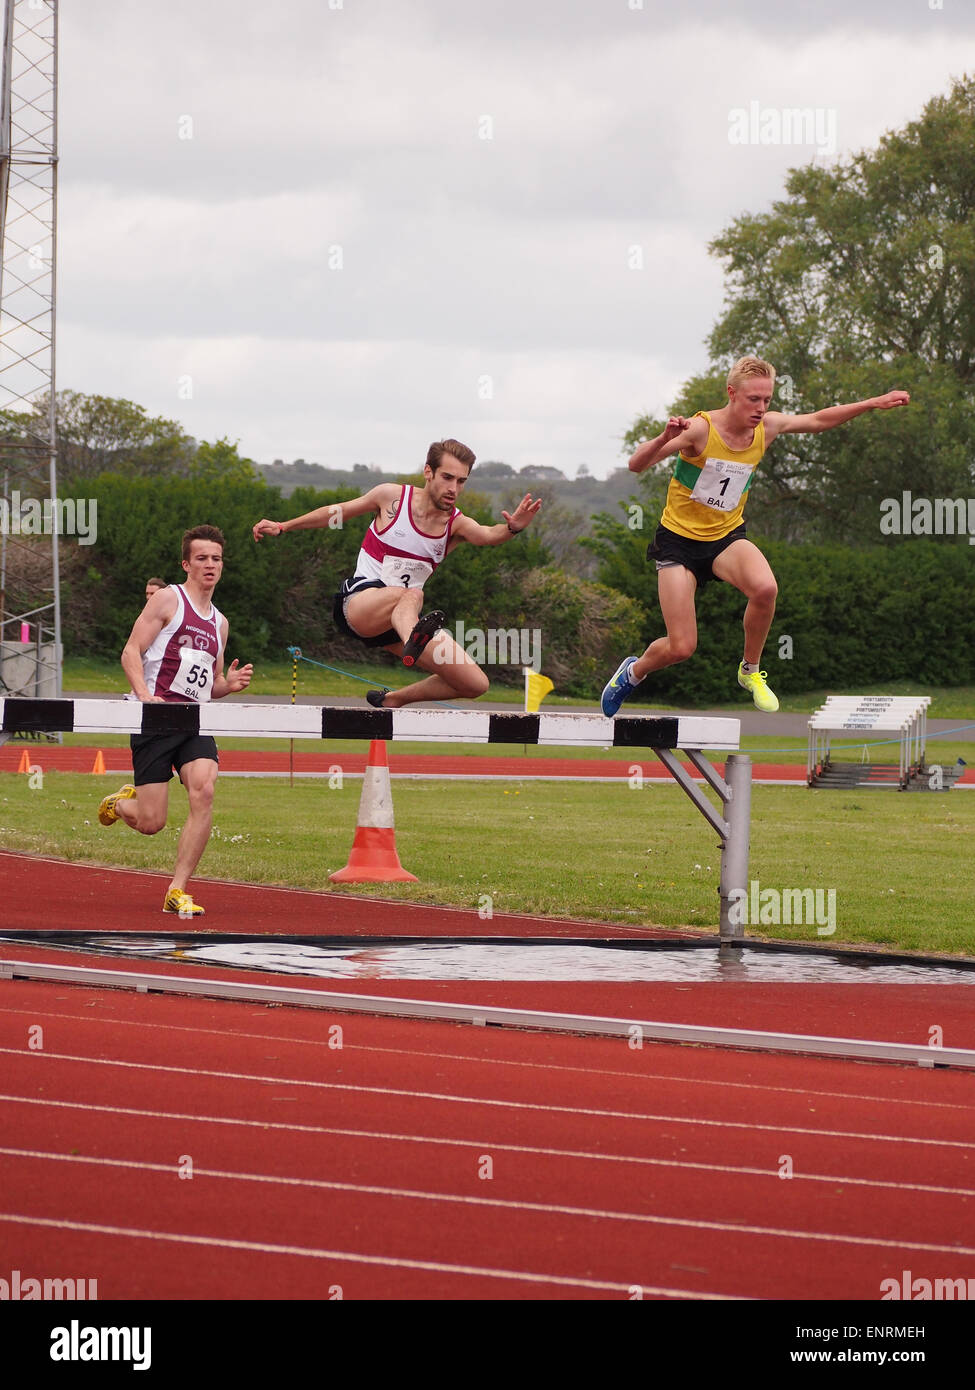 Athletes take on the water jump during a steeplechase race Stock Photo